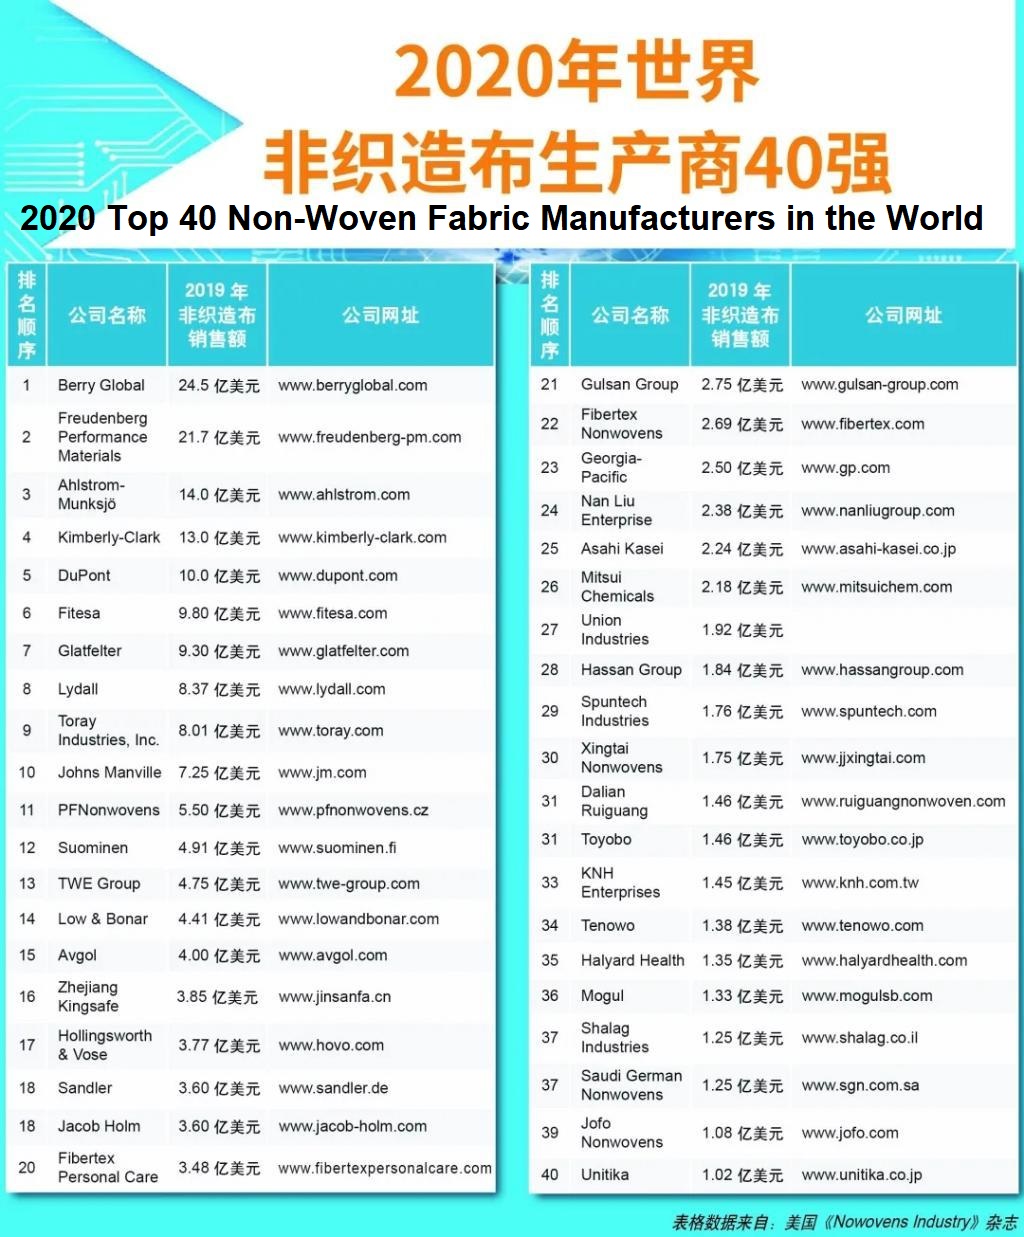 Top 40 nonwoven fabric manufacturers in the world in 2020